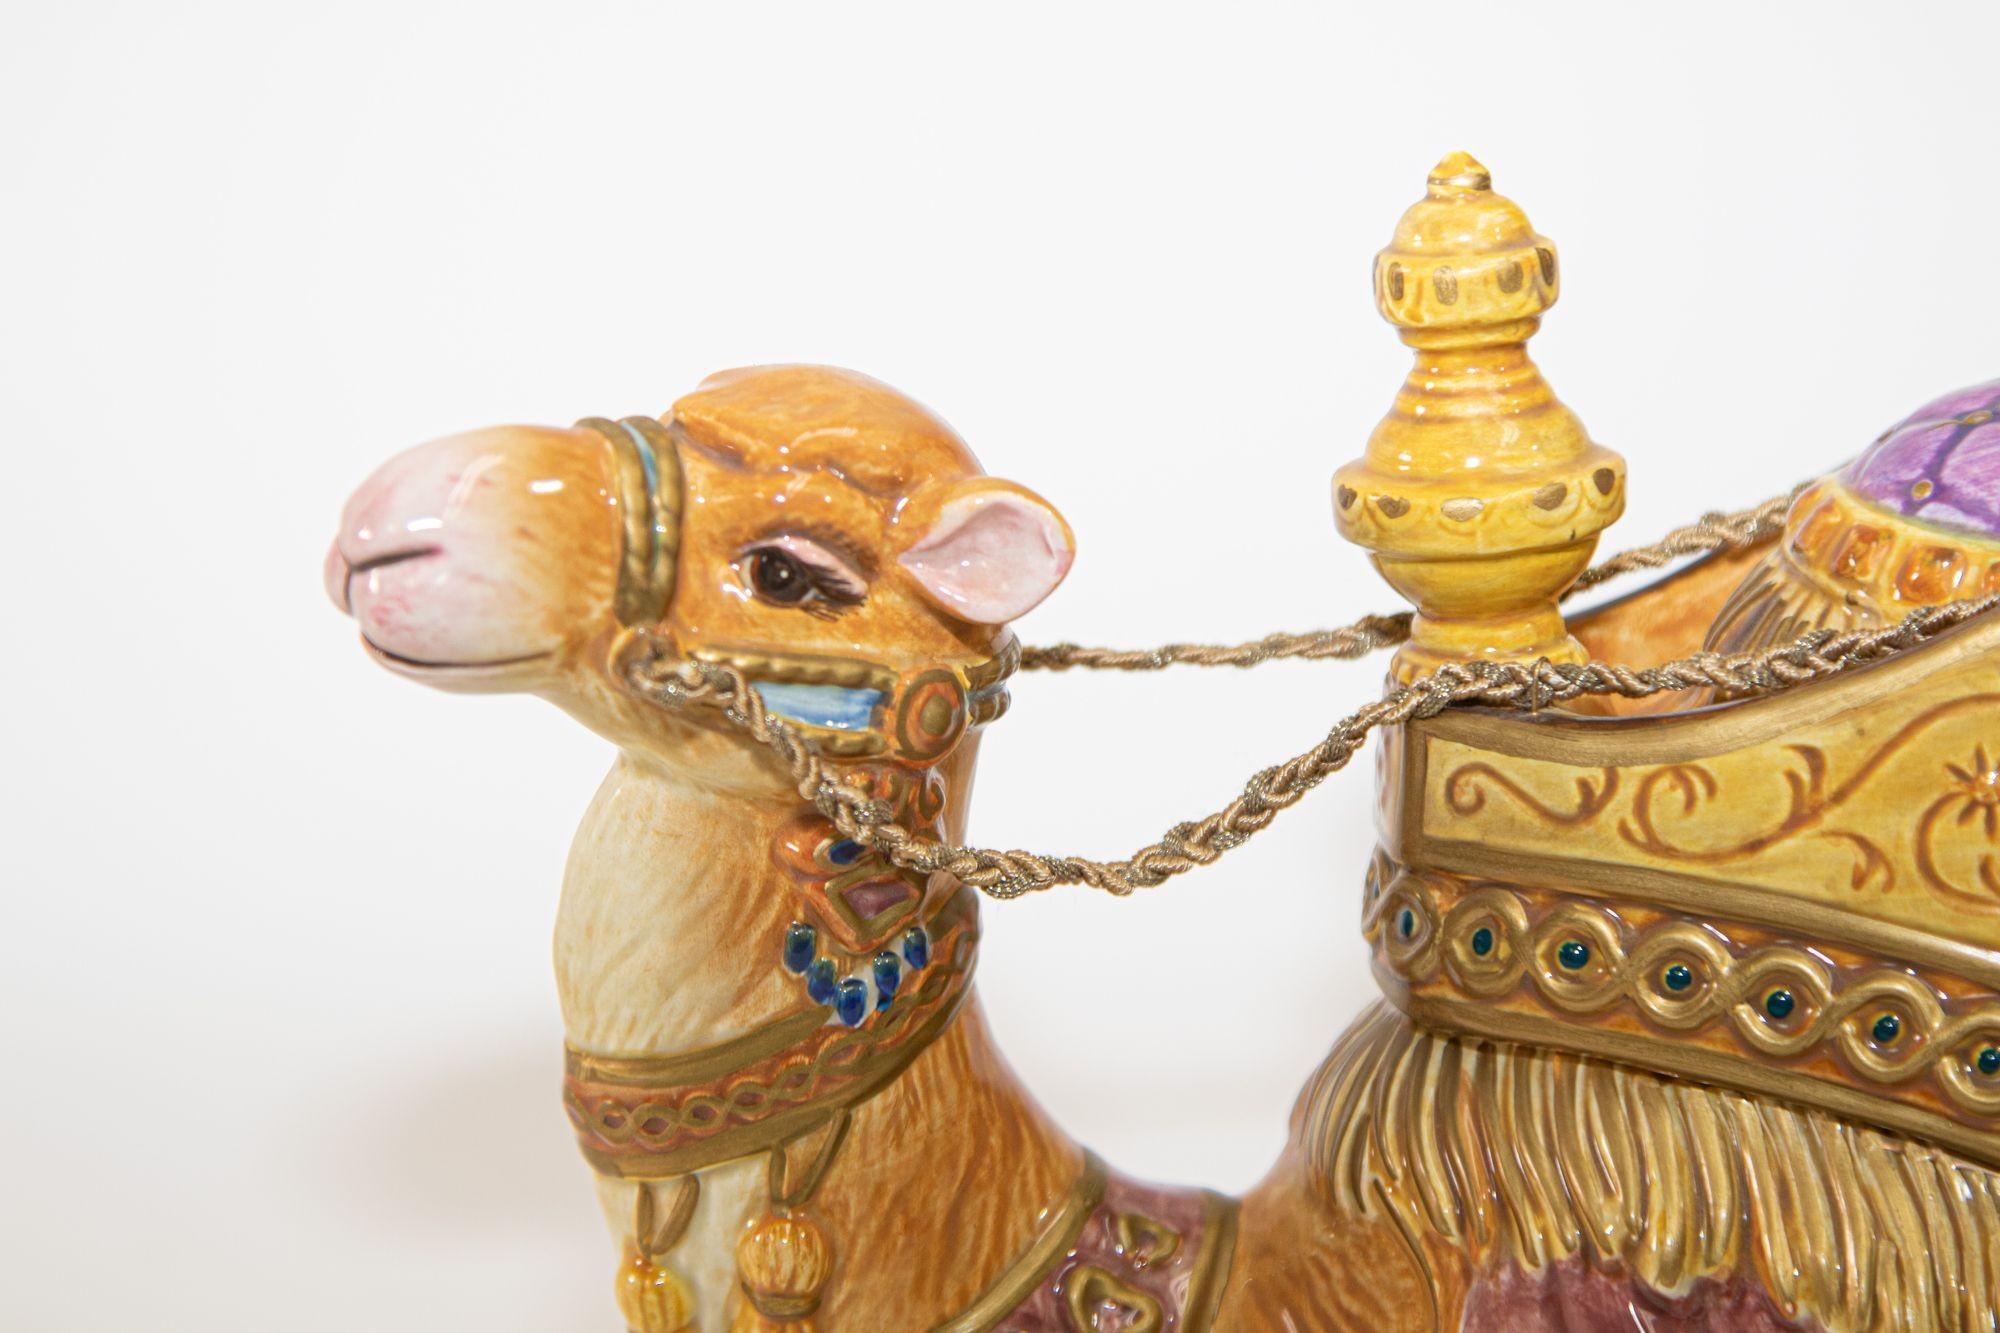 Hand painted porcelain collectible Fitz and Floyd resting Nubian camel figurine.
Beautifully detailed Arabian camel, the camel is kneeling in rest and features a pastel hues and a saddle with golden accents.
Unique blend of artistry, tradition and